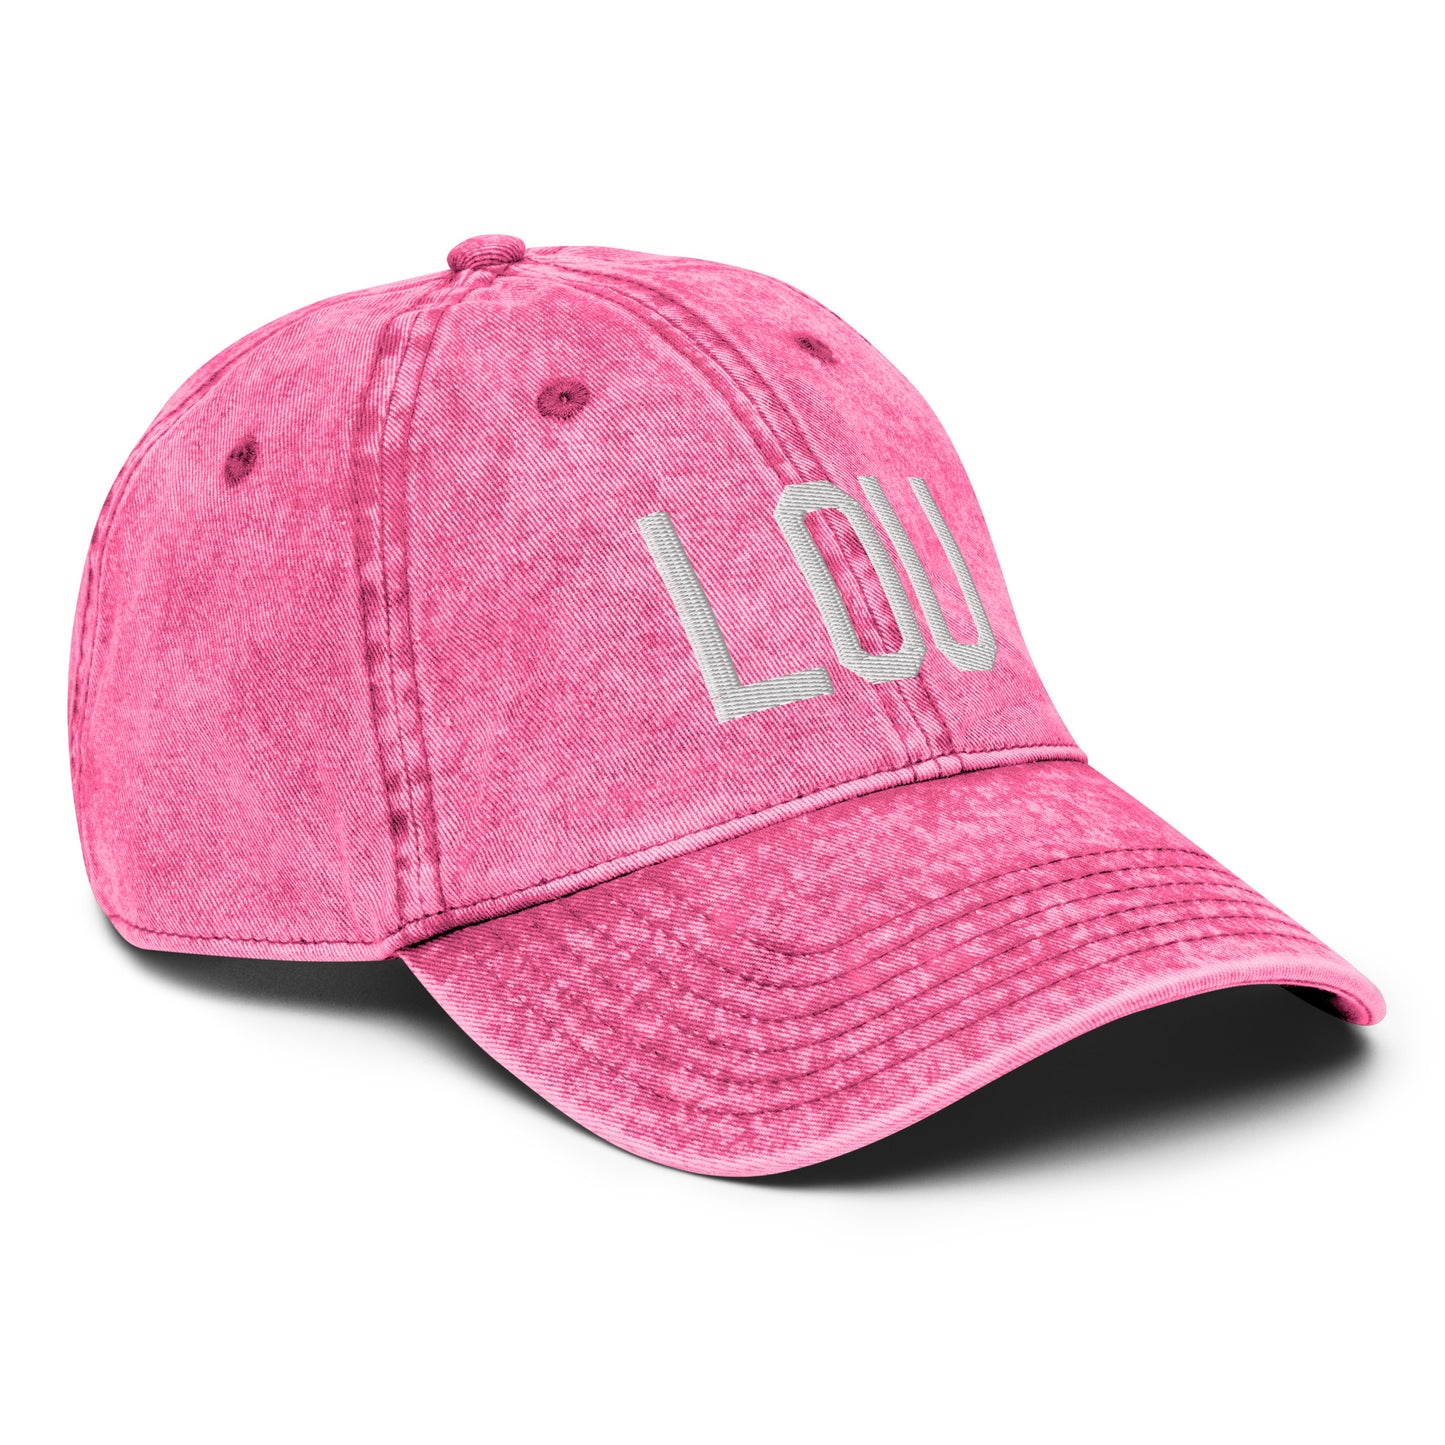 Airport Code Twill Cap - White • LOU Louisville • YHM Designs - Image 27